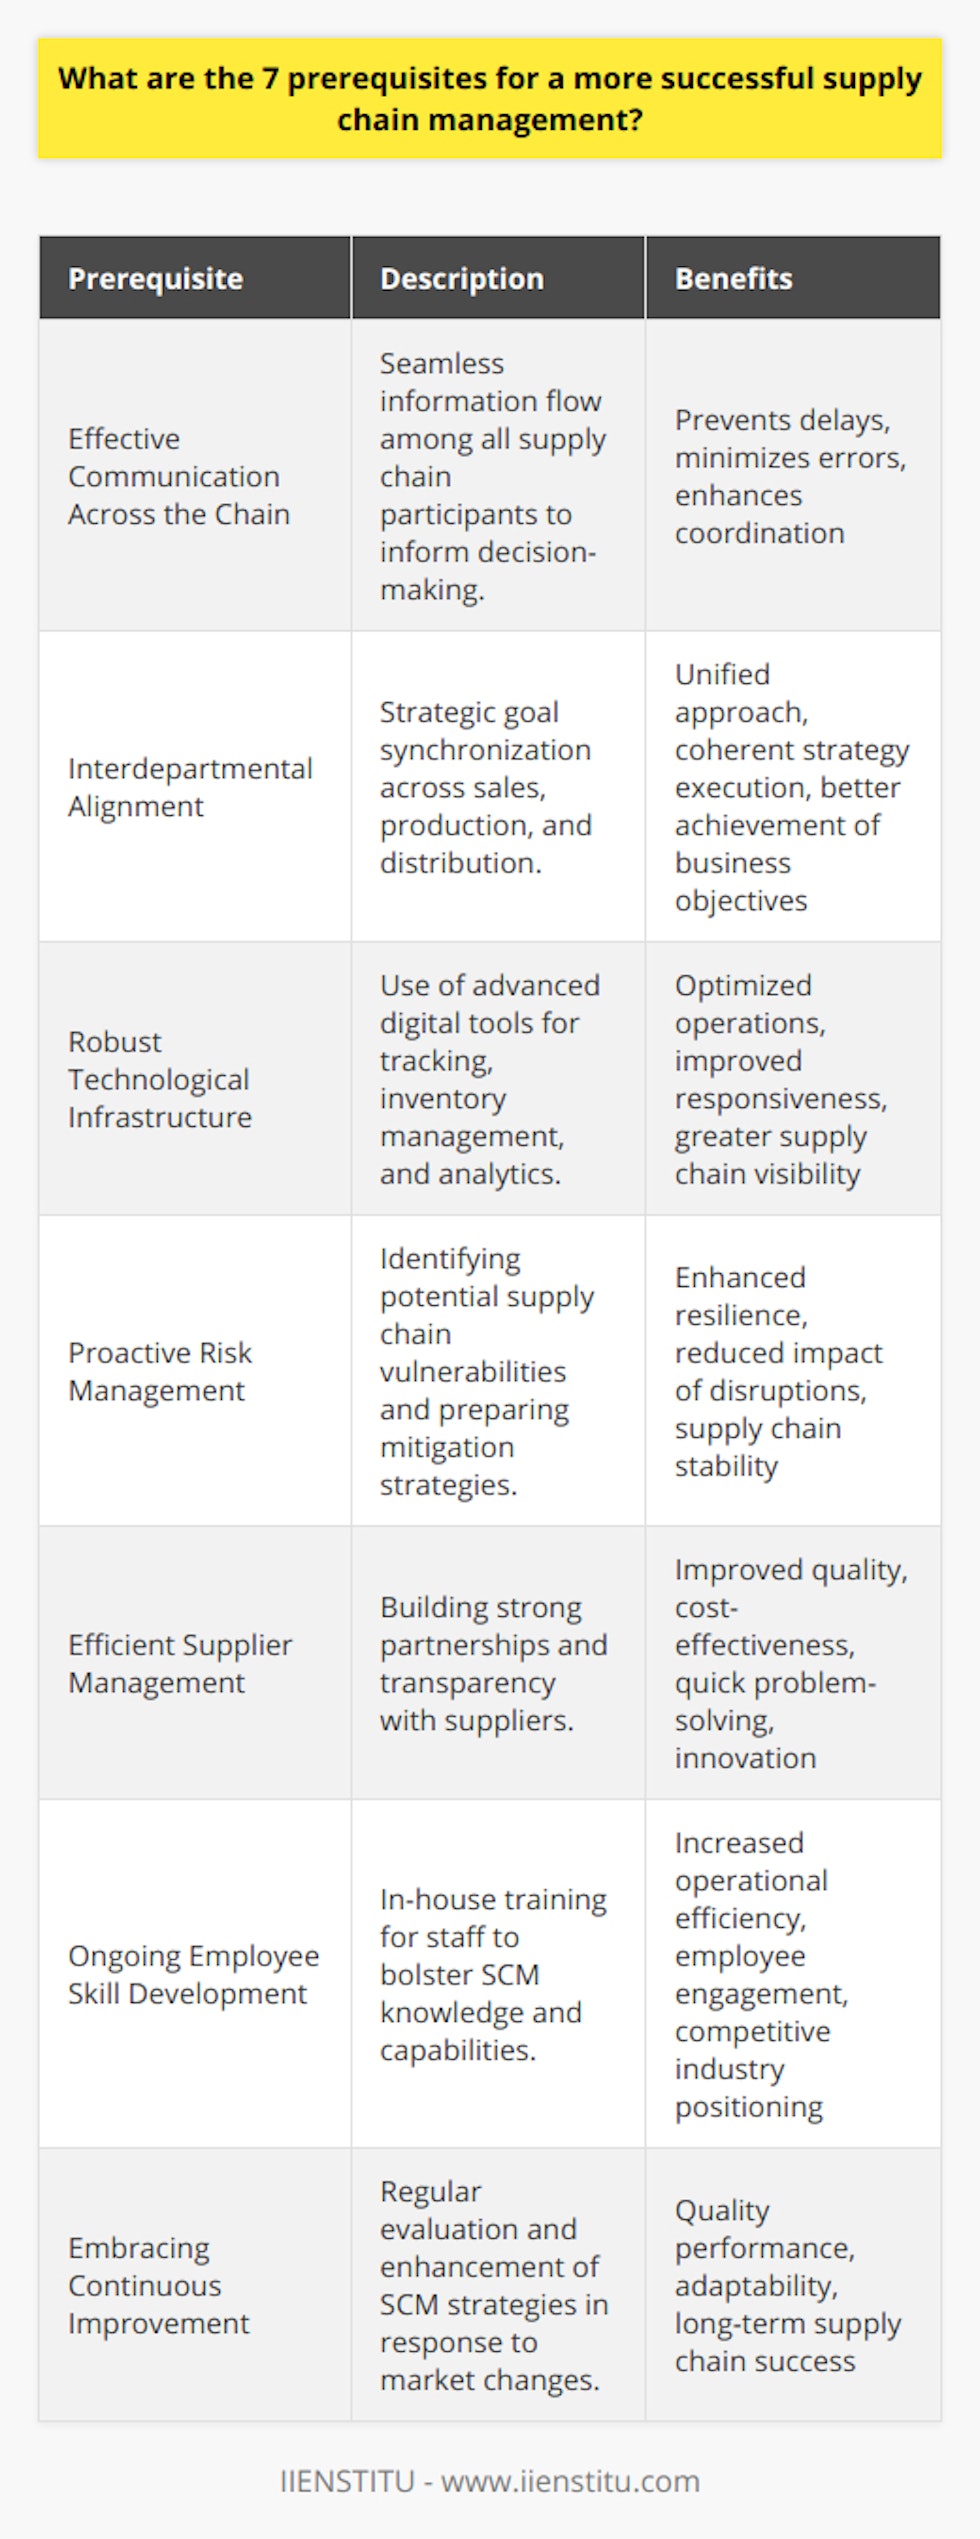 Supply chain management (SCM) is an integral facet of modern business operations, acting as the backbone that supports the flow of goods from suppliers to customers. To maximize the efficiency and effectiveness of SCM, there are 7 key prerequisites that organizations should strive to implement. By paying attention to these prerequisites, companies can achieve a more successful supply chain, enhancing their competitive edge in the marketplace.**1. Effective Communication Across the Chain:**Clear and precise communication is paramount within SCM. It entails the seamless exchange of critical data and updates across all segments of the supply chain, from procurement to logistics. This open channel of communication helps to ensure that each stakeholder has the information required to make informed decisions, thereby preventing delays and errors that can ripple through the entire chain.**2. Interdepartmental Alignment:**Supply chains are multidisciplinary in nature, touching various parts of an organization. To guarantee SCM success, there needs to be a strategic alignment of goals across all departments such as sales, production, and distribution. This alignment ensures that the supply chain strategy is coherent and supported by every unit, leading to synchronized actions that contribute to overall business objectives.**3. Robust Technological Infrastructure:**In the digital age, technology serves as the cornerstone of efficient SCM. The deployment of innovative solutions, including real-time tracking systems, advanced inventory management software, and predictive analytics, can offer a panoramic view of the supply chain. By leveraging technology, organizations can significantly optimize their supply chain operations, ensuring responsiveness and agility in the dynamic market.**4. Proactive Risk Management:**Risk is an inherent element of SCM due to factors like geopolitical events, natural disasters, and market volatility. A resilient supply chain must have a strategy to assess and mitigate risks promptly. This involves analyzing potential vulnerabilities and implementing measures such as diversifying supplier bases or maintaining safety stock to prepare for unforeseeable disruptions.**5. Efficient Supplier Management:**Suppliers are the lifeblood of the supply chain, and establishing robust relationships with them is crucial. Collaborative efforts and transparency with suppliers can create a shared interest in the success of the supply chain. This partnership aids in faster problem resolution, innovation and can lead to improvement in quality, costs, and reliability.**6. Ongoing Employee Skill Development:**Equipping employees with the latest skills and knowledge in SCM is essential for a company to remain competitive. Investment in training and professional development for staff ensures that they are proficient in modern practices, technologies, and strategies related to SCM. This commitment to skill enhancement can yield dividends in terms of operational efficiency and supply chain optimization.**7. Embracing Continuous Improvement:**The landscape of SCM is perpetually evolving, which means that successful supply chain management depends on a culture of continuous improvement. By regularly reviewing and refining SCM strategies and operations, businesses can adapt to changes within the market, consumer expectations, or technological advancements. This iterative process of improvement propels the supply chain toward better performance and long-term success.Lastly, organizations that wish to deepen their knowledge and proficiency in supply chain management may consider learning resources from entities like IIENSTITU. Such institutions offer specialized programs that can provide insights and expertise to help businesses meet these supply chain prerequisites effectively.